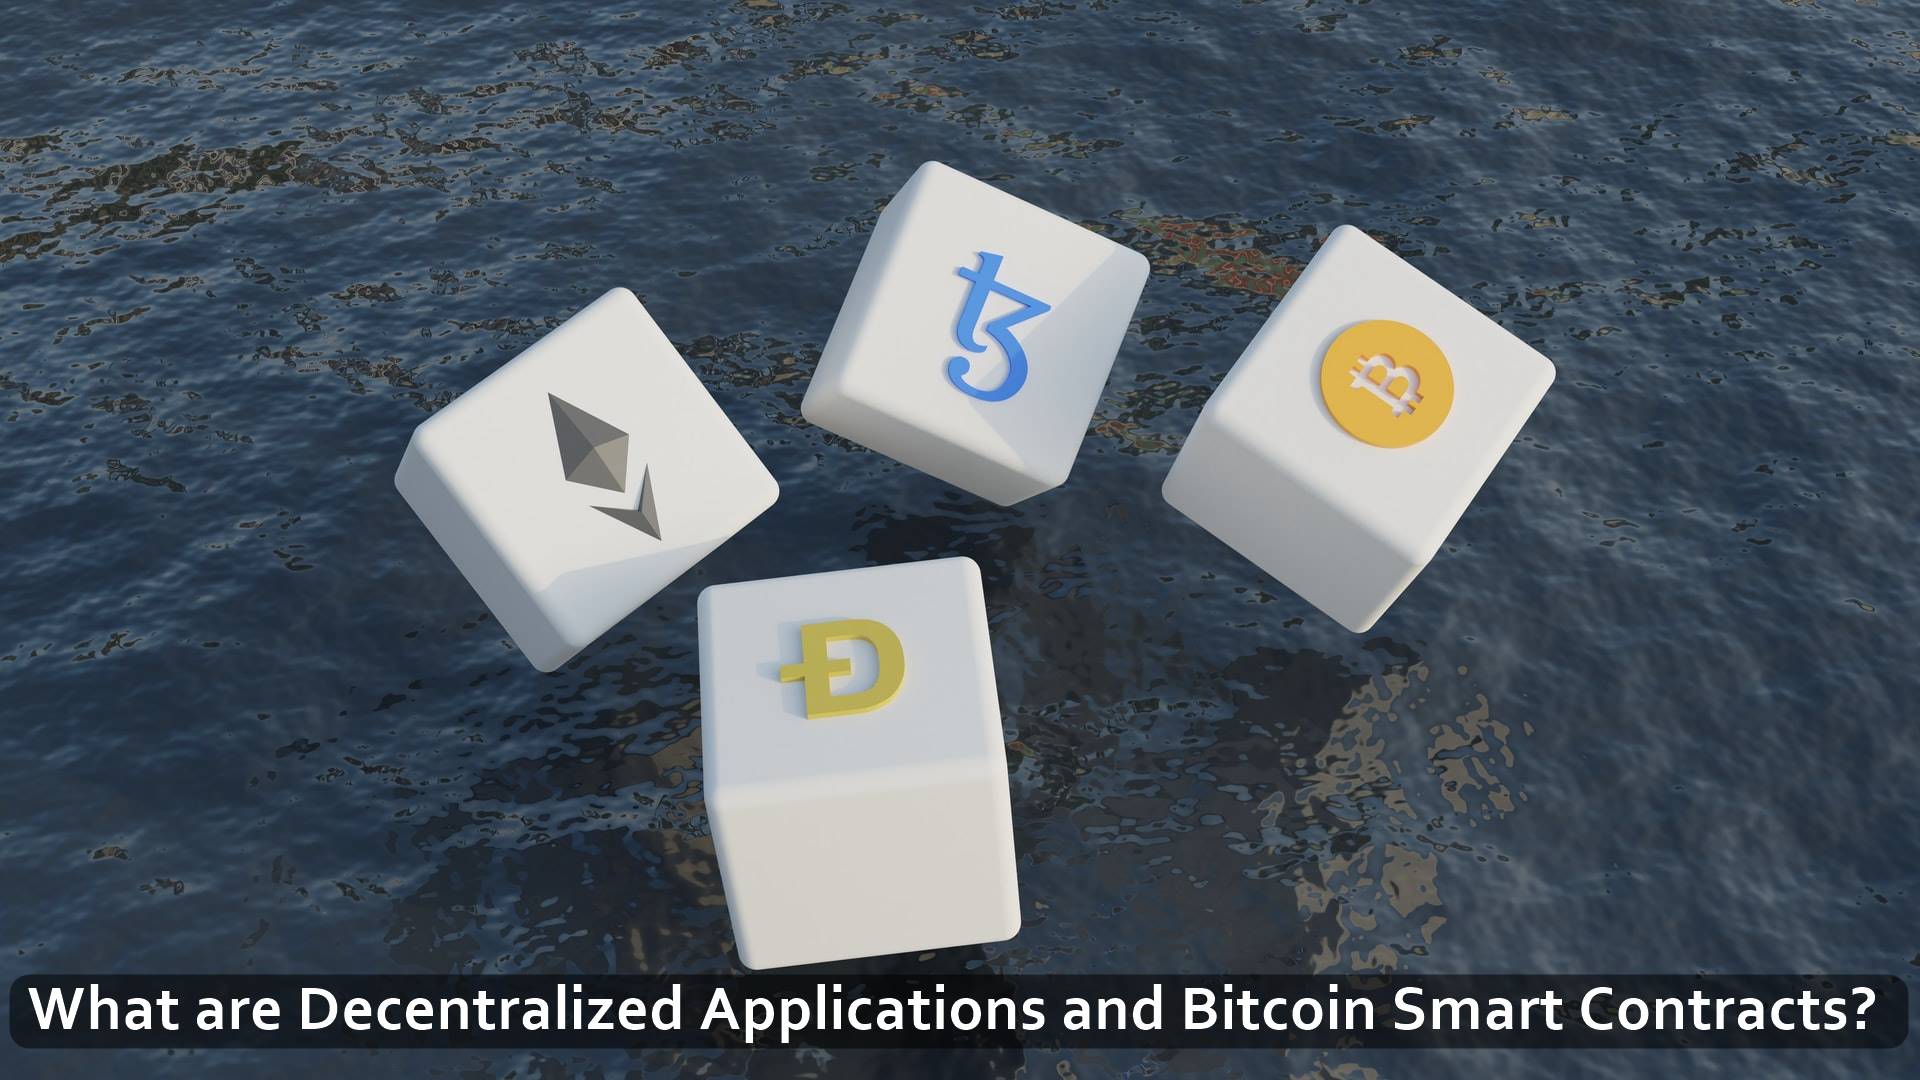 What are Decentralized Applications and Bitcoin Smart Contracts